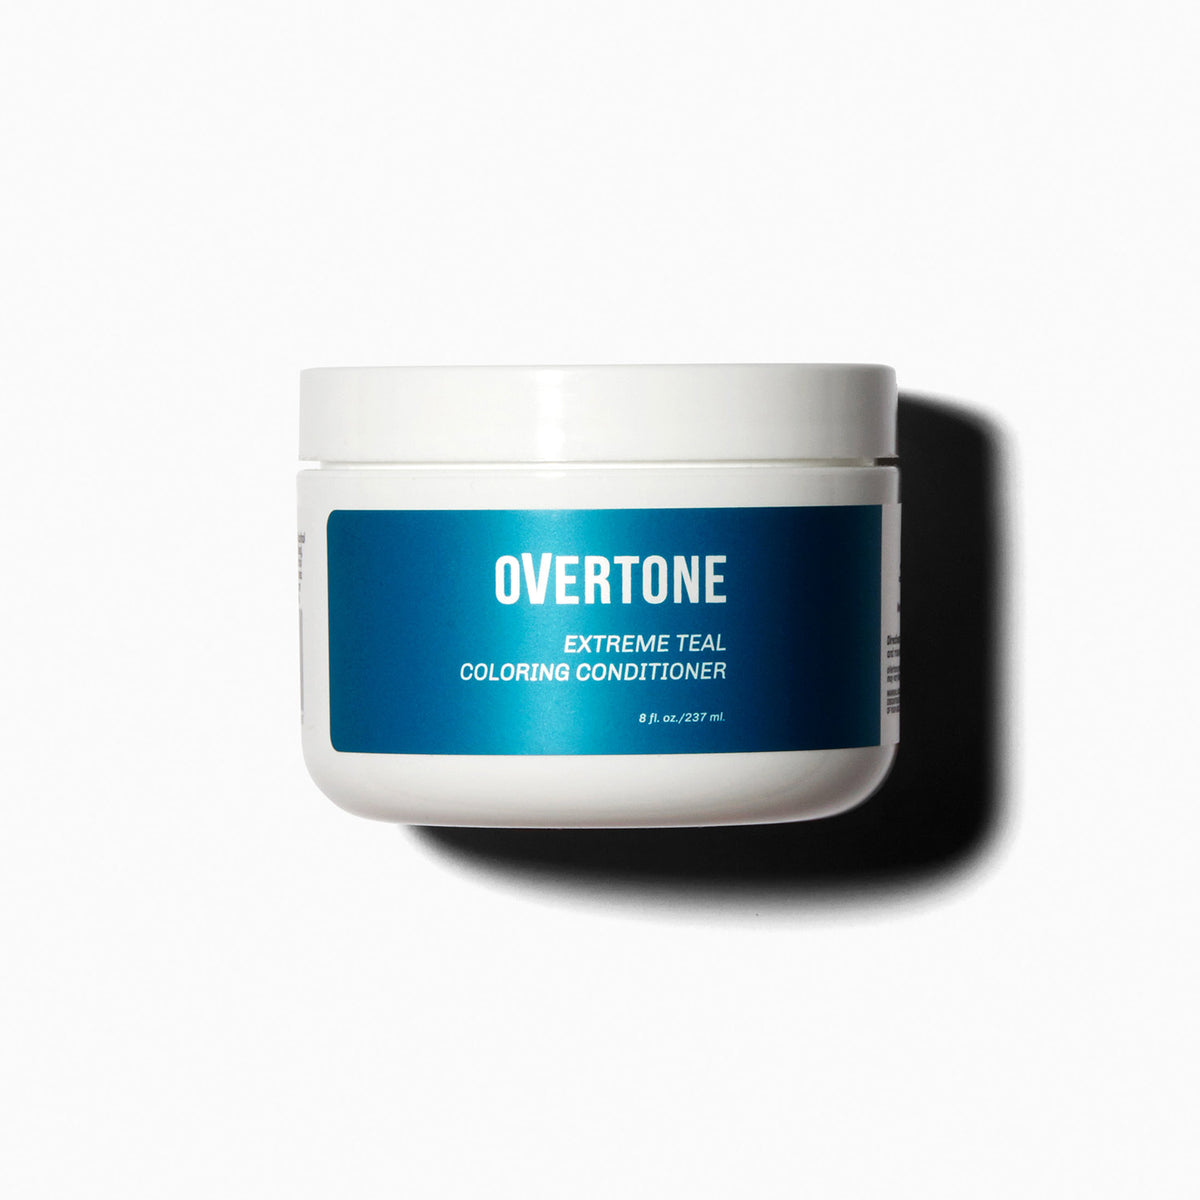 oVertone Extreme Teal Coloring Conditioner